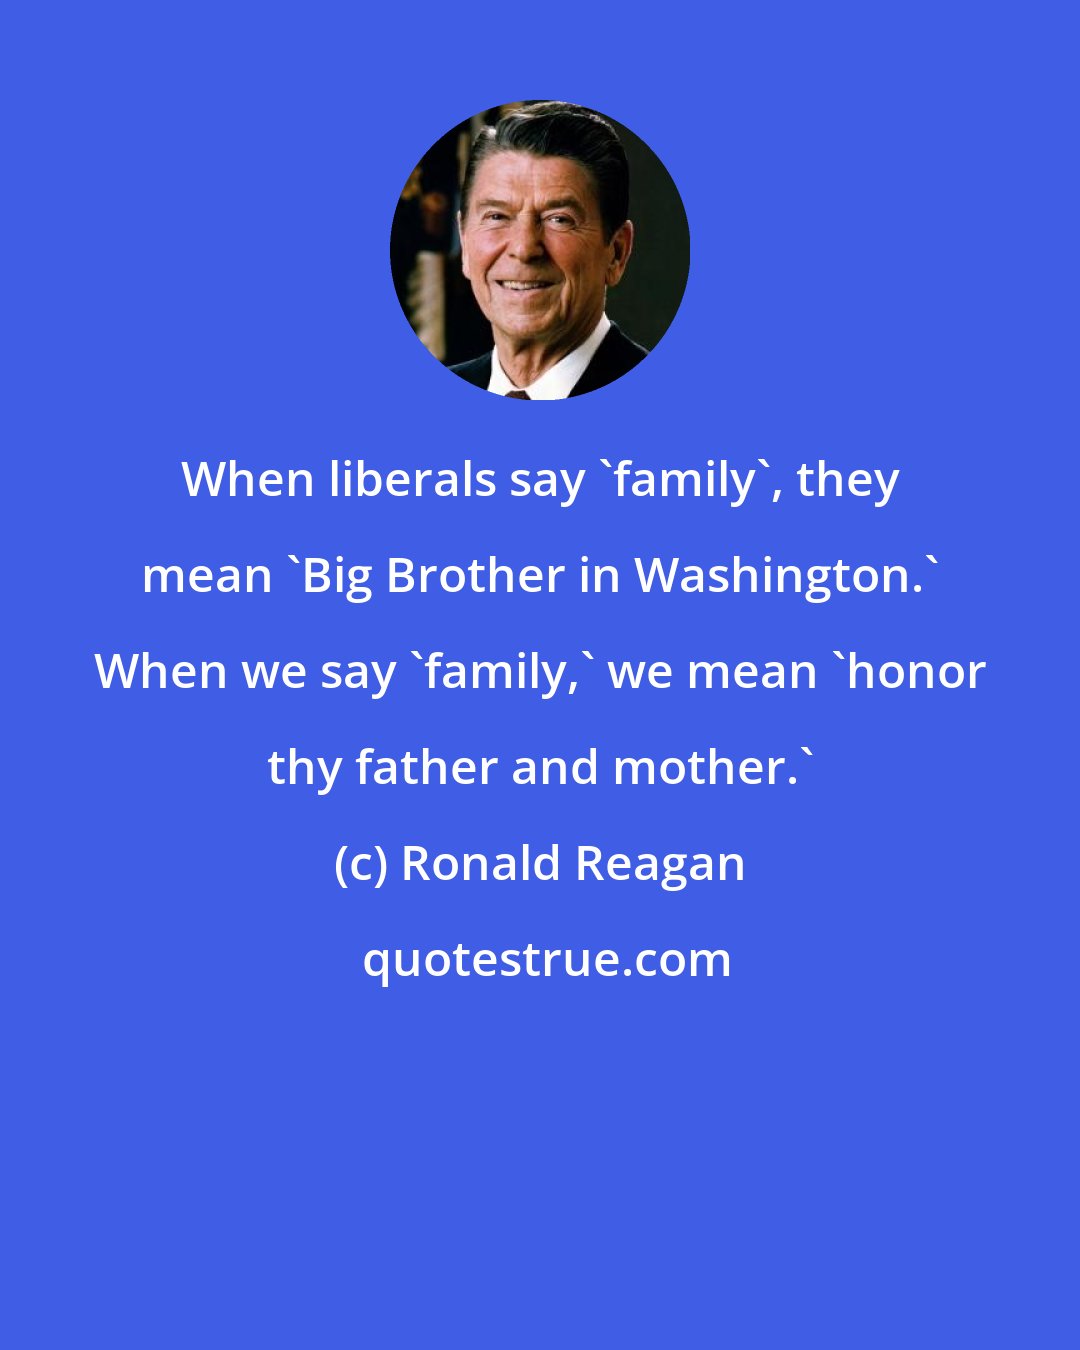 Ronald Reagan: When liberals say 'family', they mean 'Big Brother in Washington.' When we say 'family,' we mean 'honor thy father and mother.'